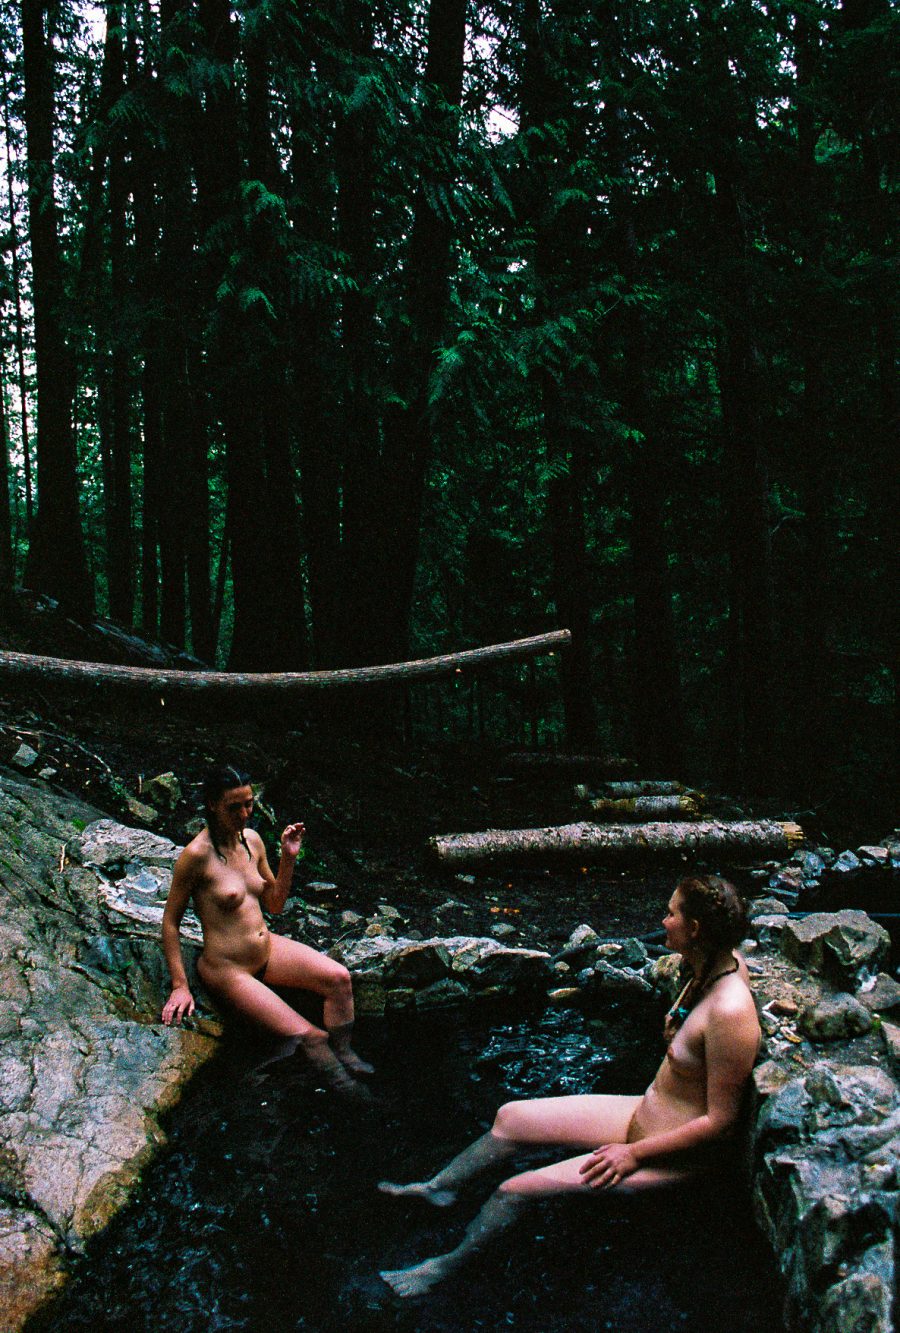 Two people hanging out in a hot spring in the middle of a forest.